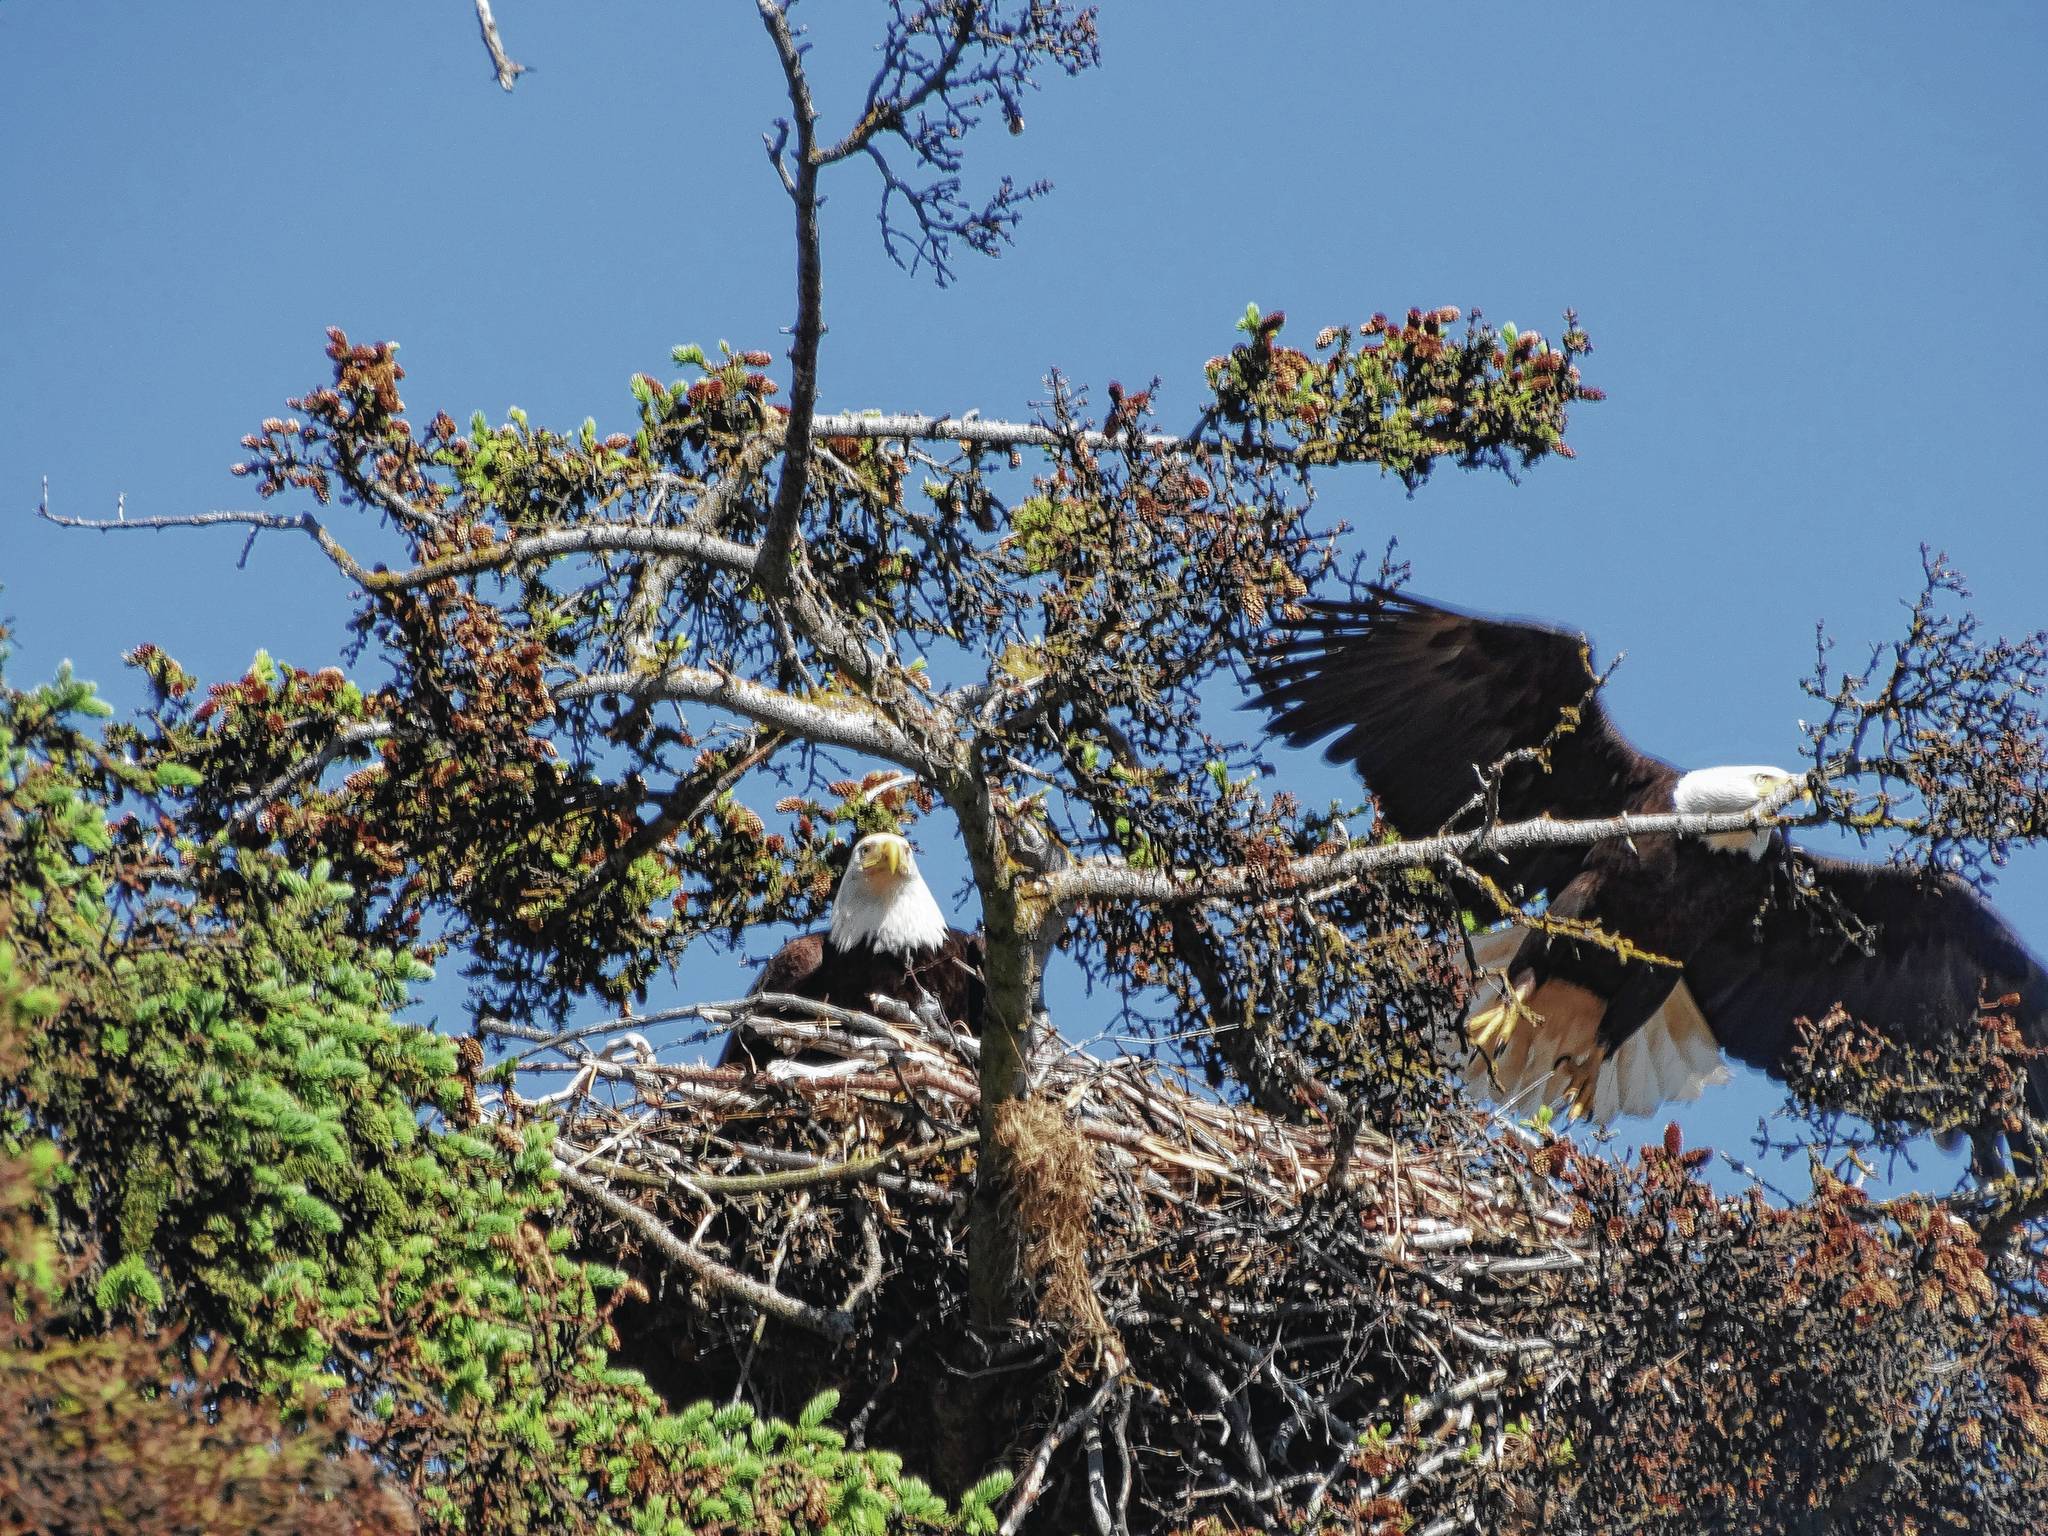 A bald eagle flies away from its nest on the evening of June. 24, 2017, at the spot across from the Homer Post Office on the Sterling Highway. Since 2010, a pair of bald eagles has nested in the area near Beluga Slough south of the Lake Street and Sterling Highway intersection. The first nest was destroyed when the tree fell down in a winter storm. In 2012 the eagles built a new nest across from the Homer Post Office by the motorhome dump station. In 2014 they built another nest in a new tree closer to the slough. In 2016 they built another nest, but in 2017 moved back to the post office location. Photo by Peter MacDonald for the Homer News